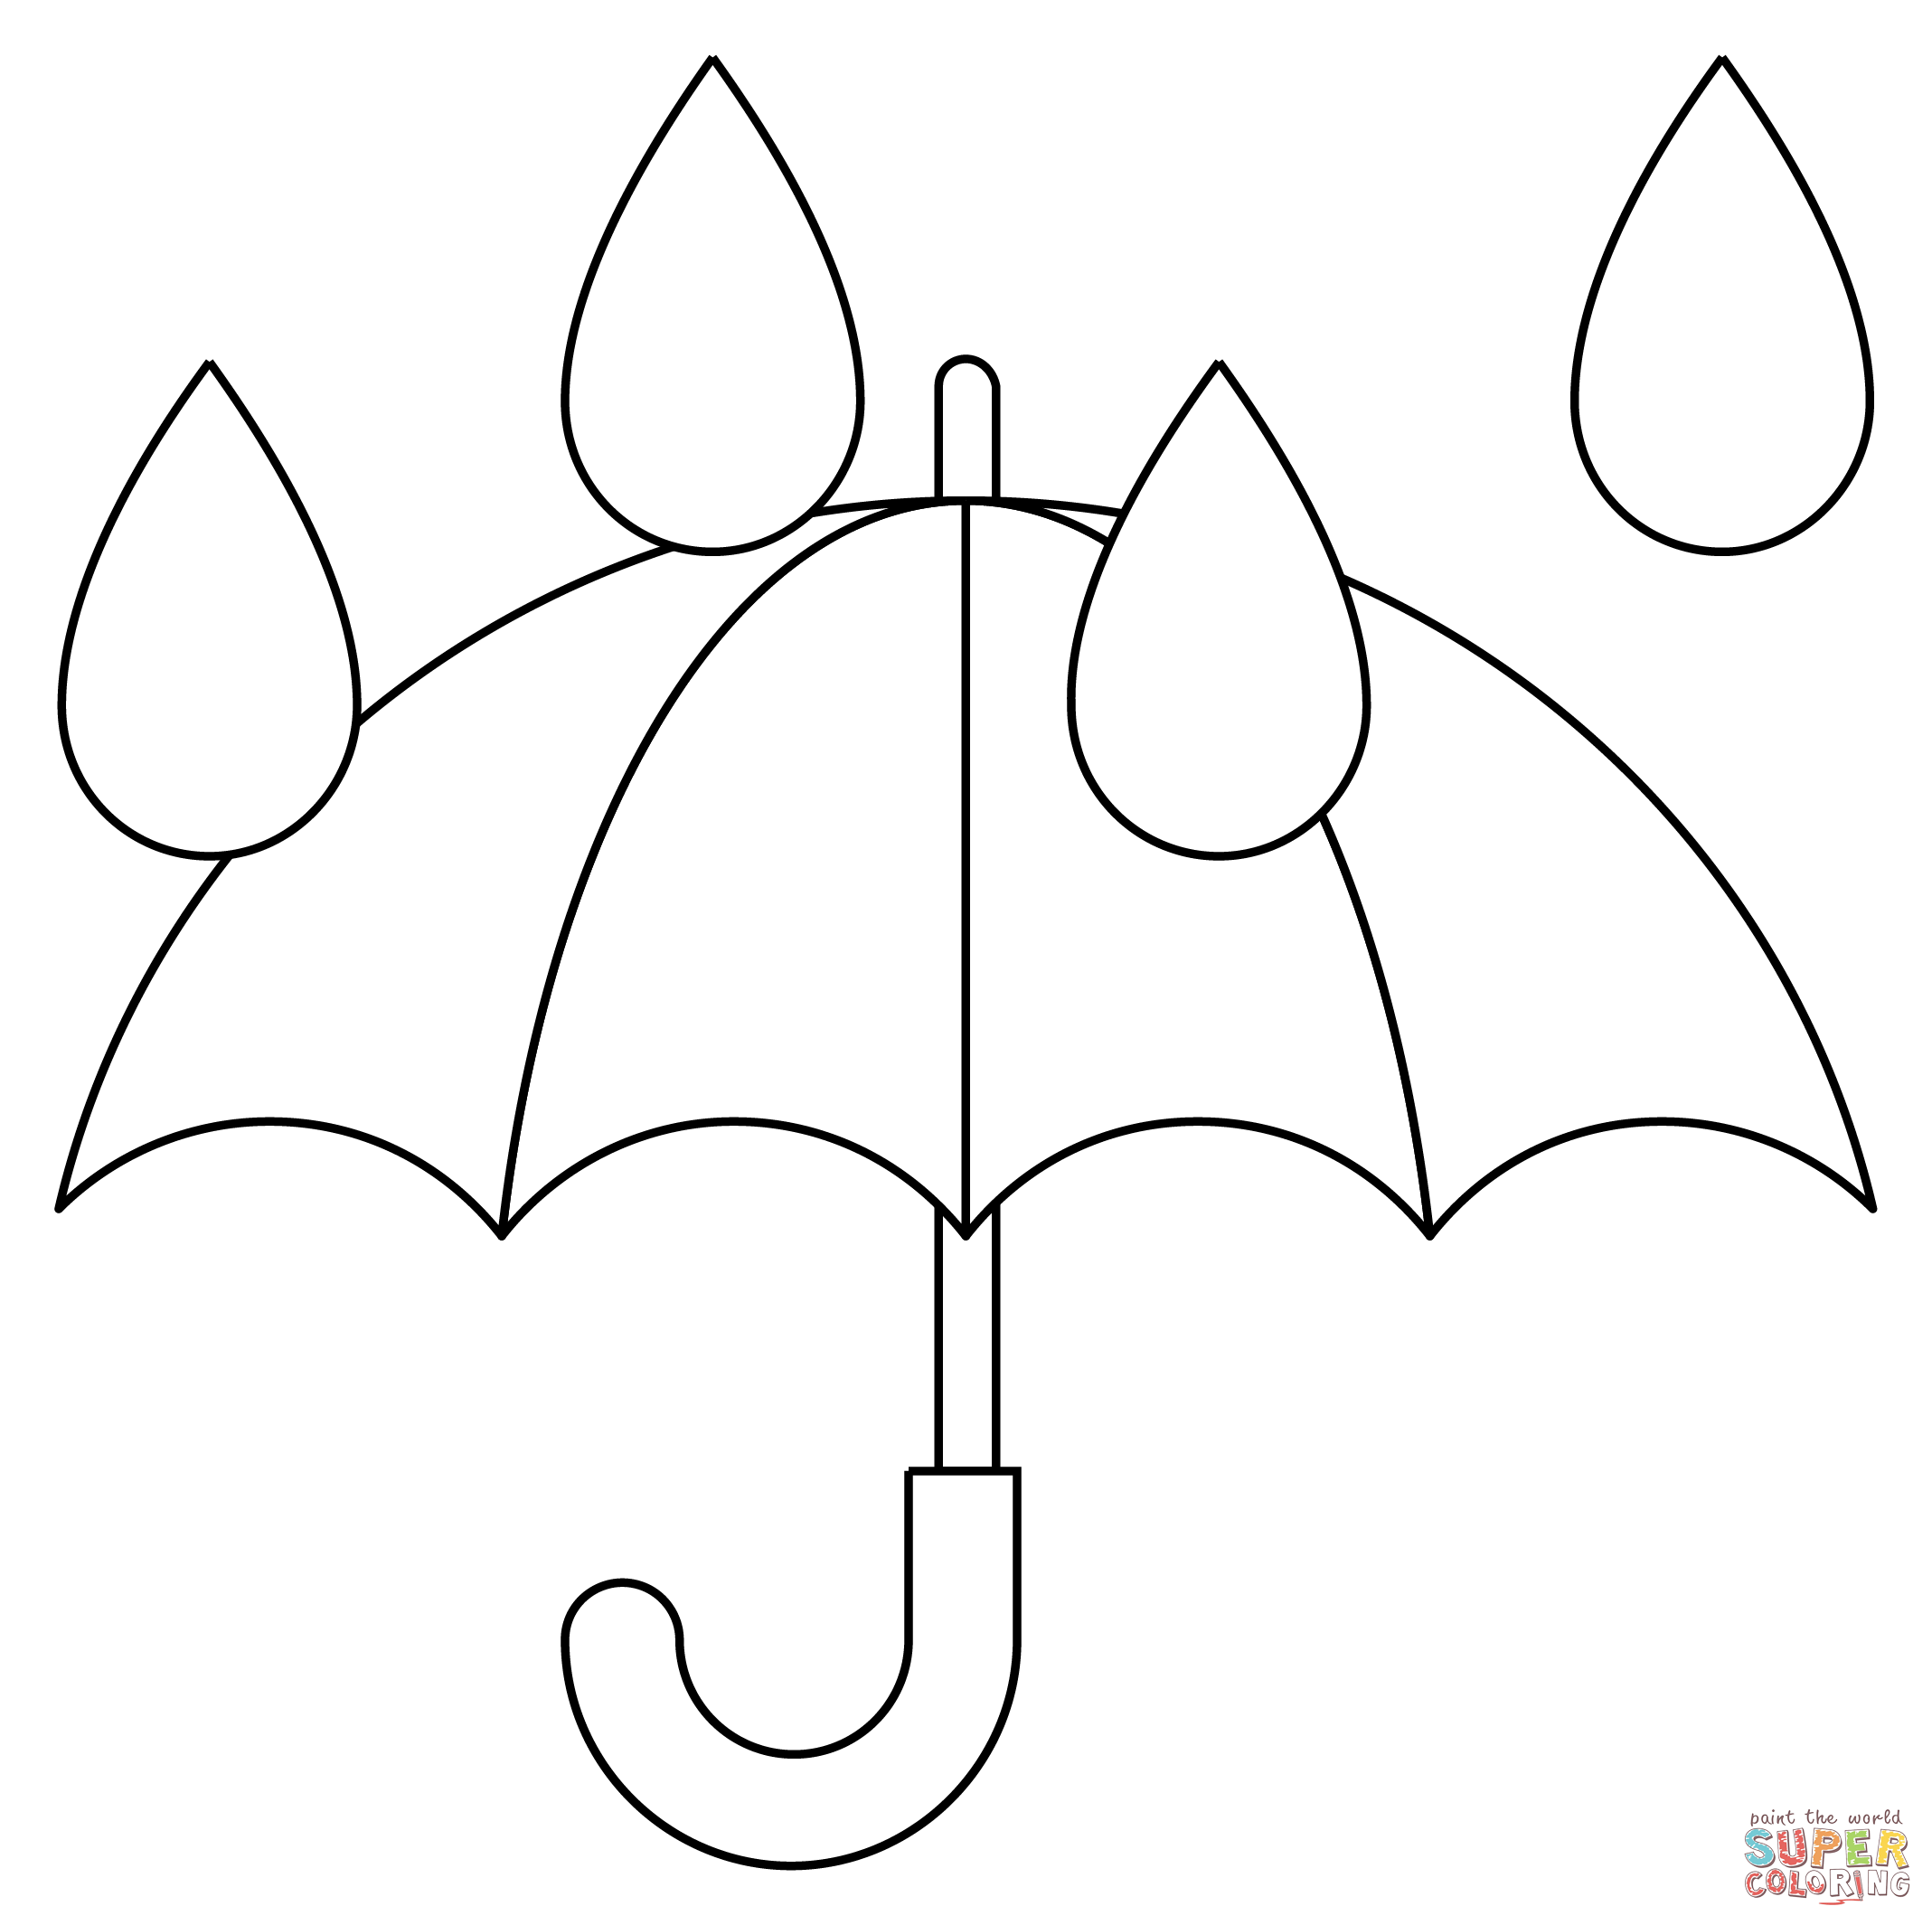 Umbrella with rain drops coloring page free printable coloring pages